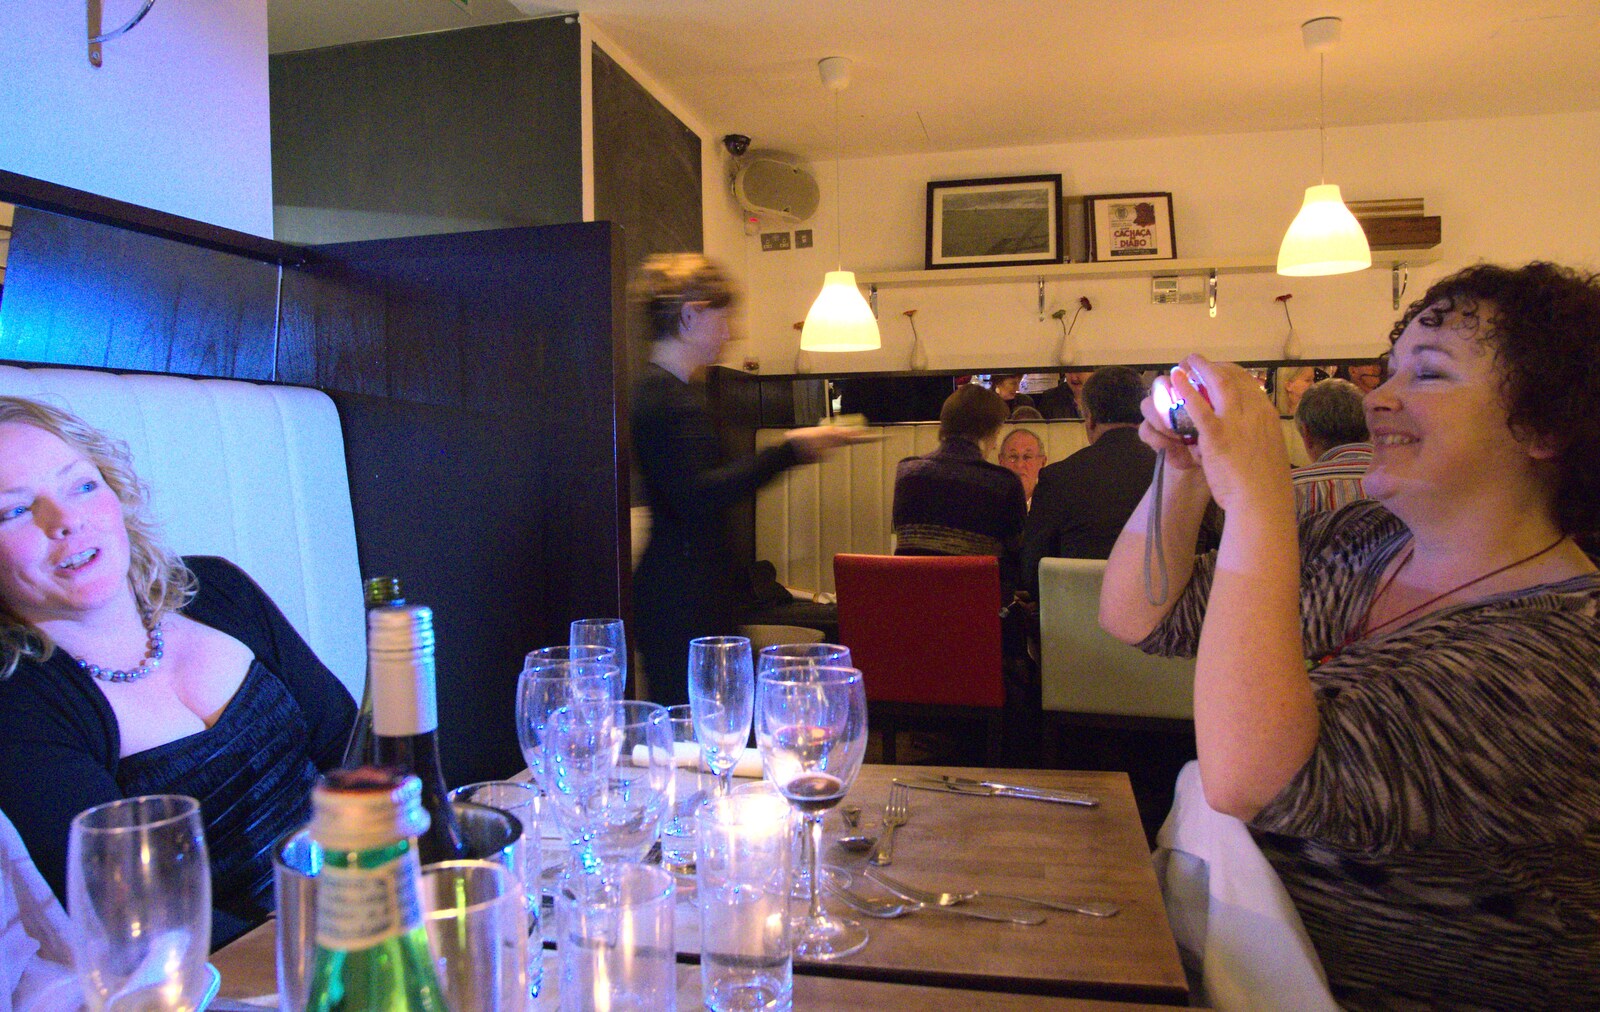 Louise gets a photo of Jane from Nom Nom's Popup Restaurant, Dublin, Ireland - 7th January 2012